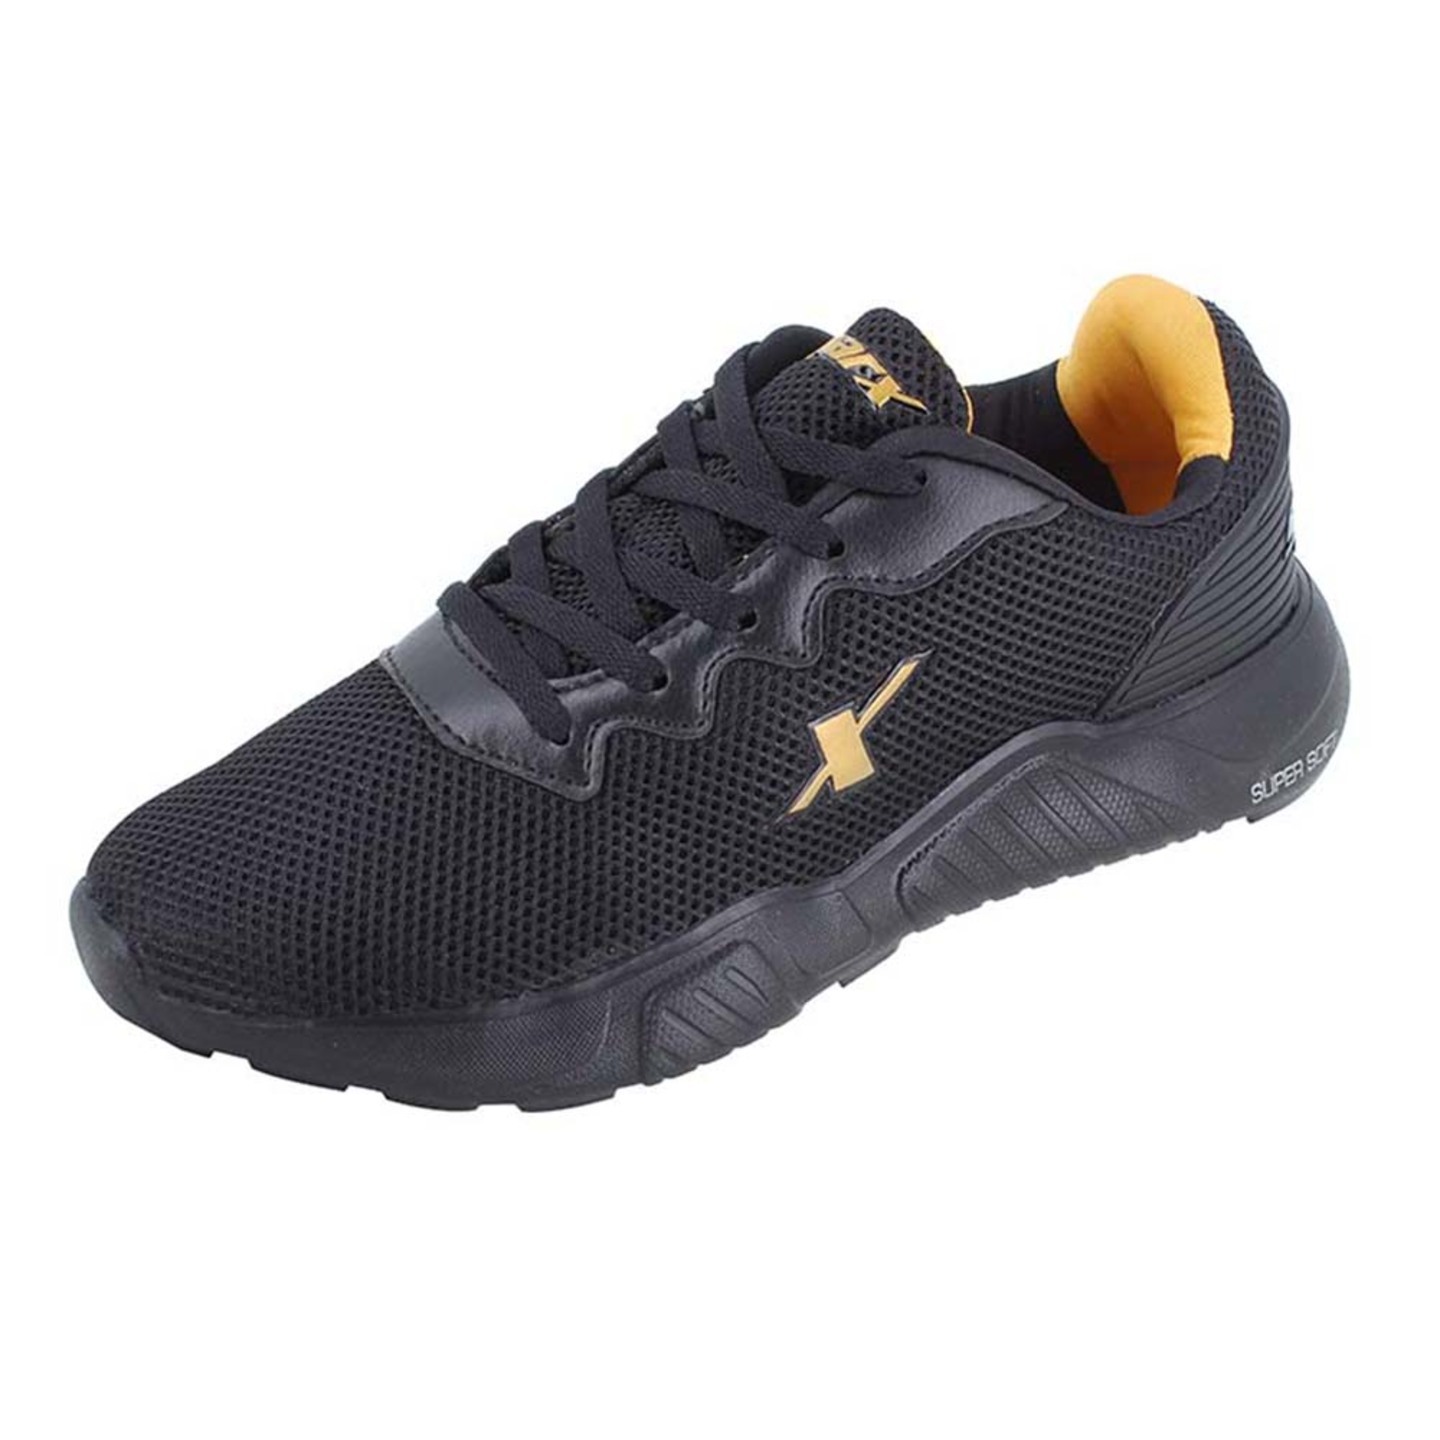 Sparx Athleisure Shoes for Men SM-648